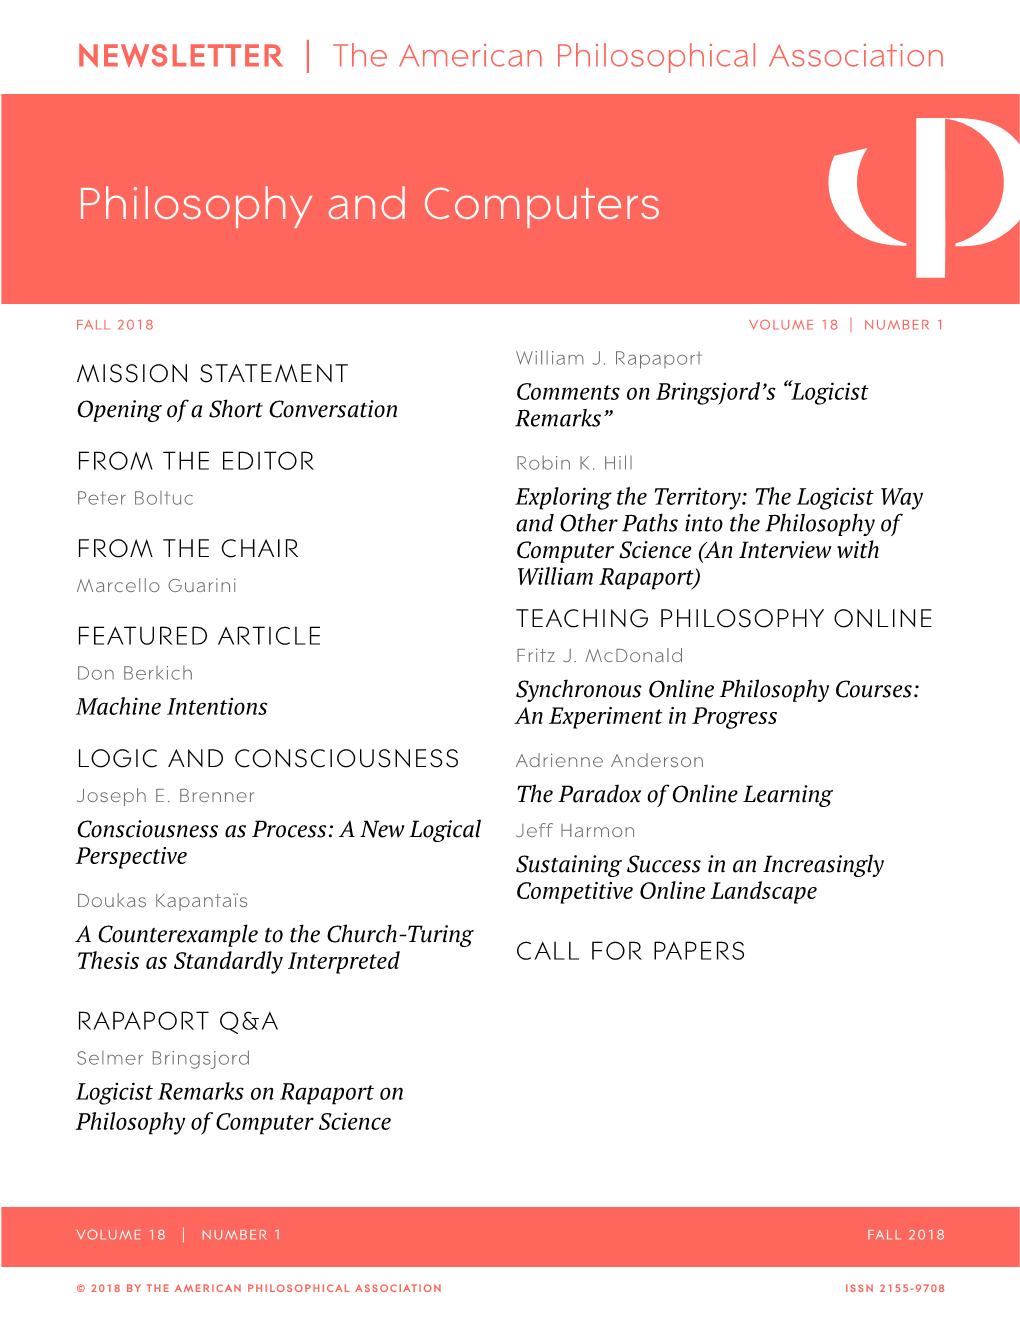 APA Newsletter on Philosophy and Computers, Vol. 18, No. 1